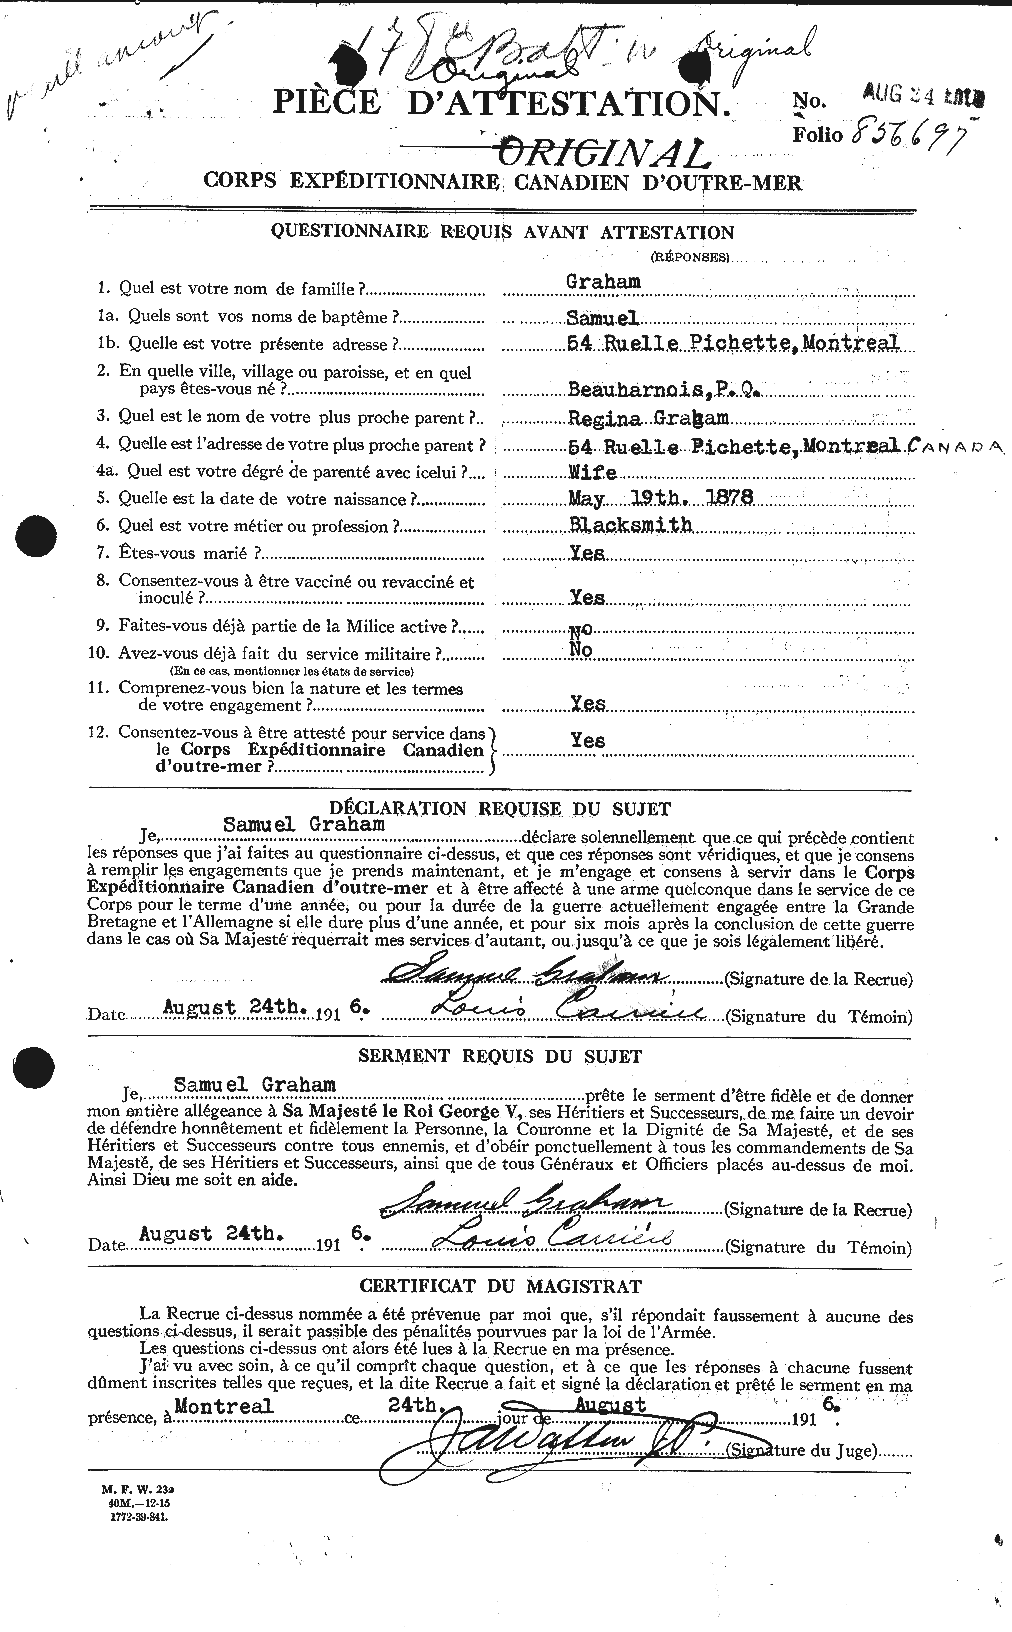 Personnel Records of the First World War - CEF 359450a